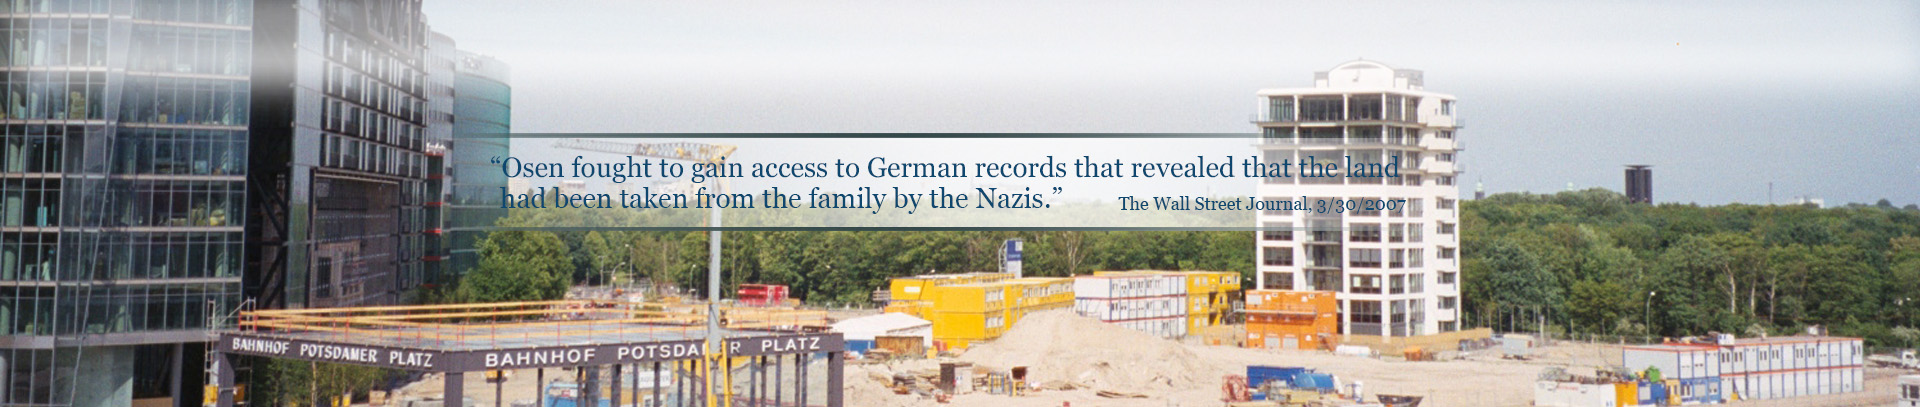 "Osen fought to gain access to German records that revealed that the land had been taken from the family by the Nazis." - The Wall Street Journal, 3/30/2007